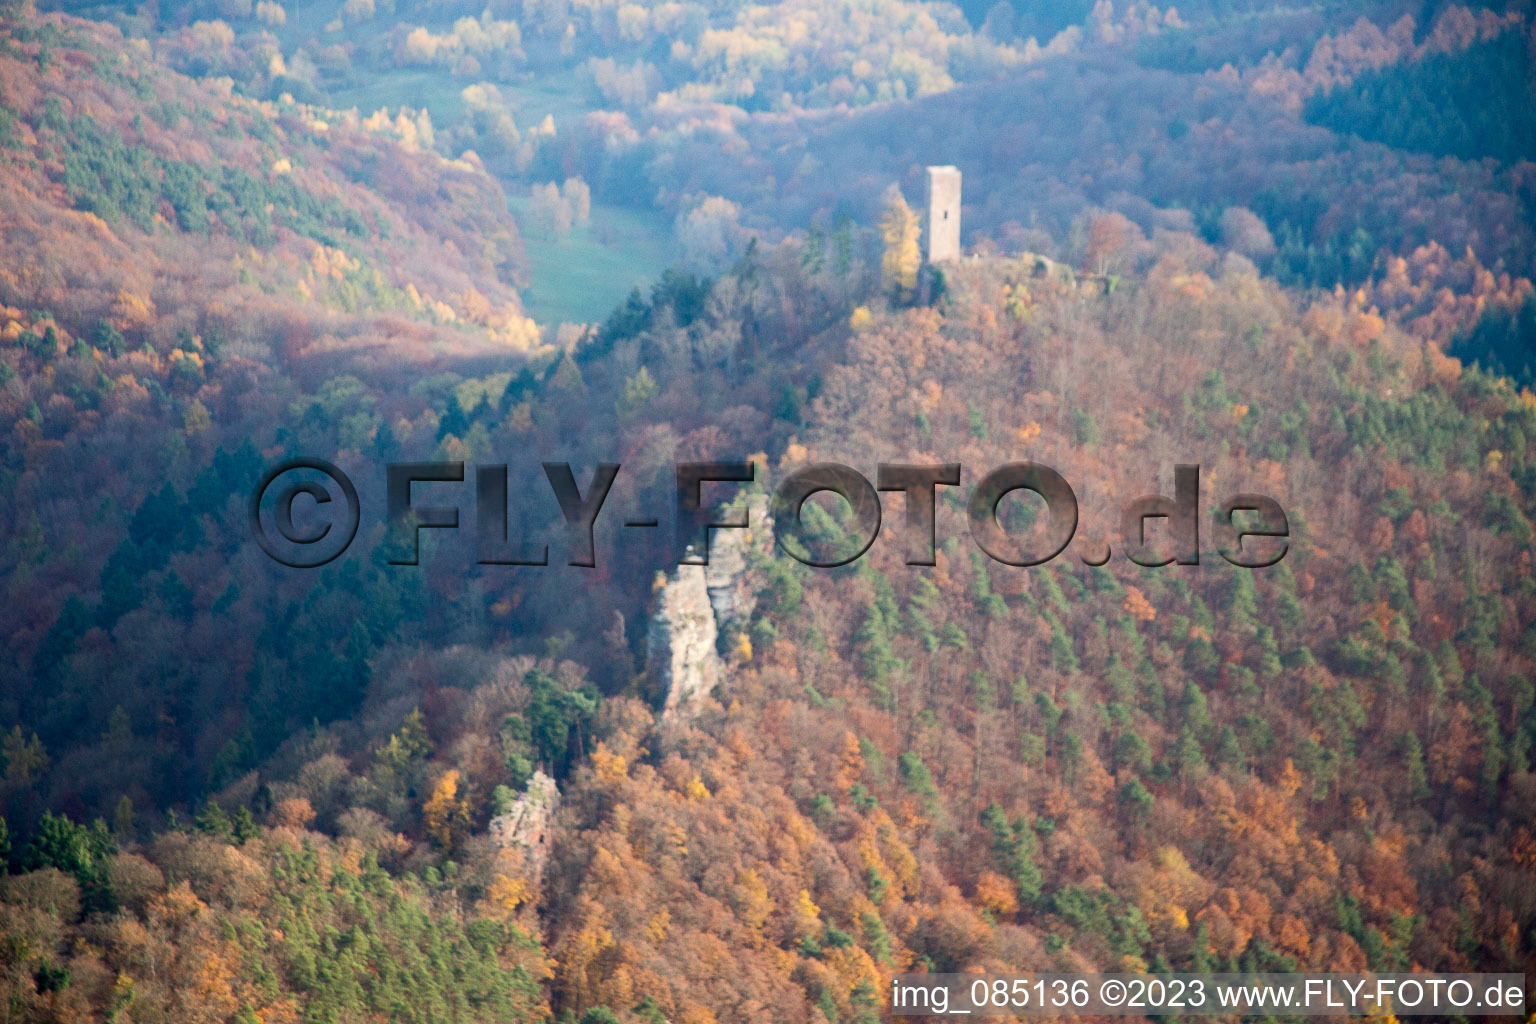 Trifels Castle in Annweiler am Trifels in the state Rhineland-Palatinate, Germany from the plane